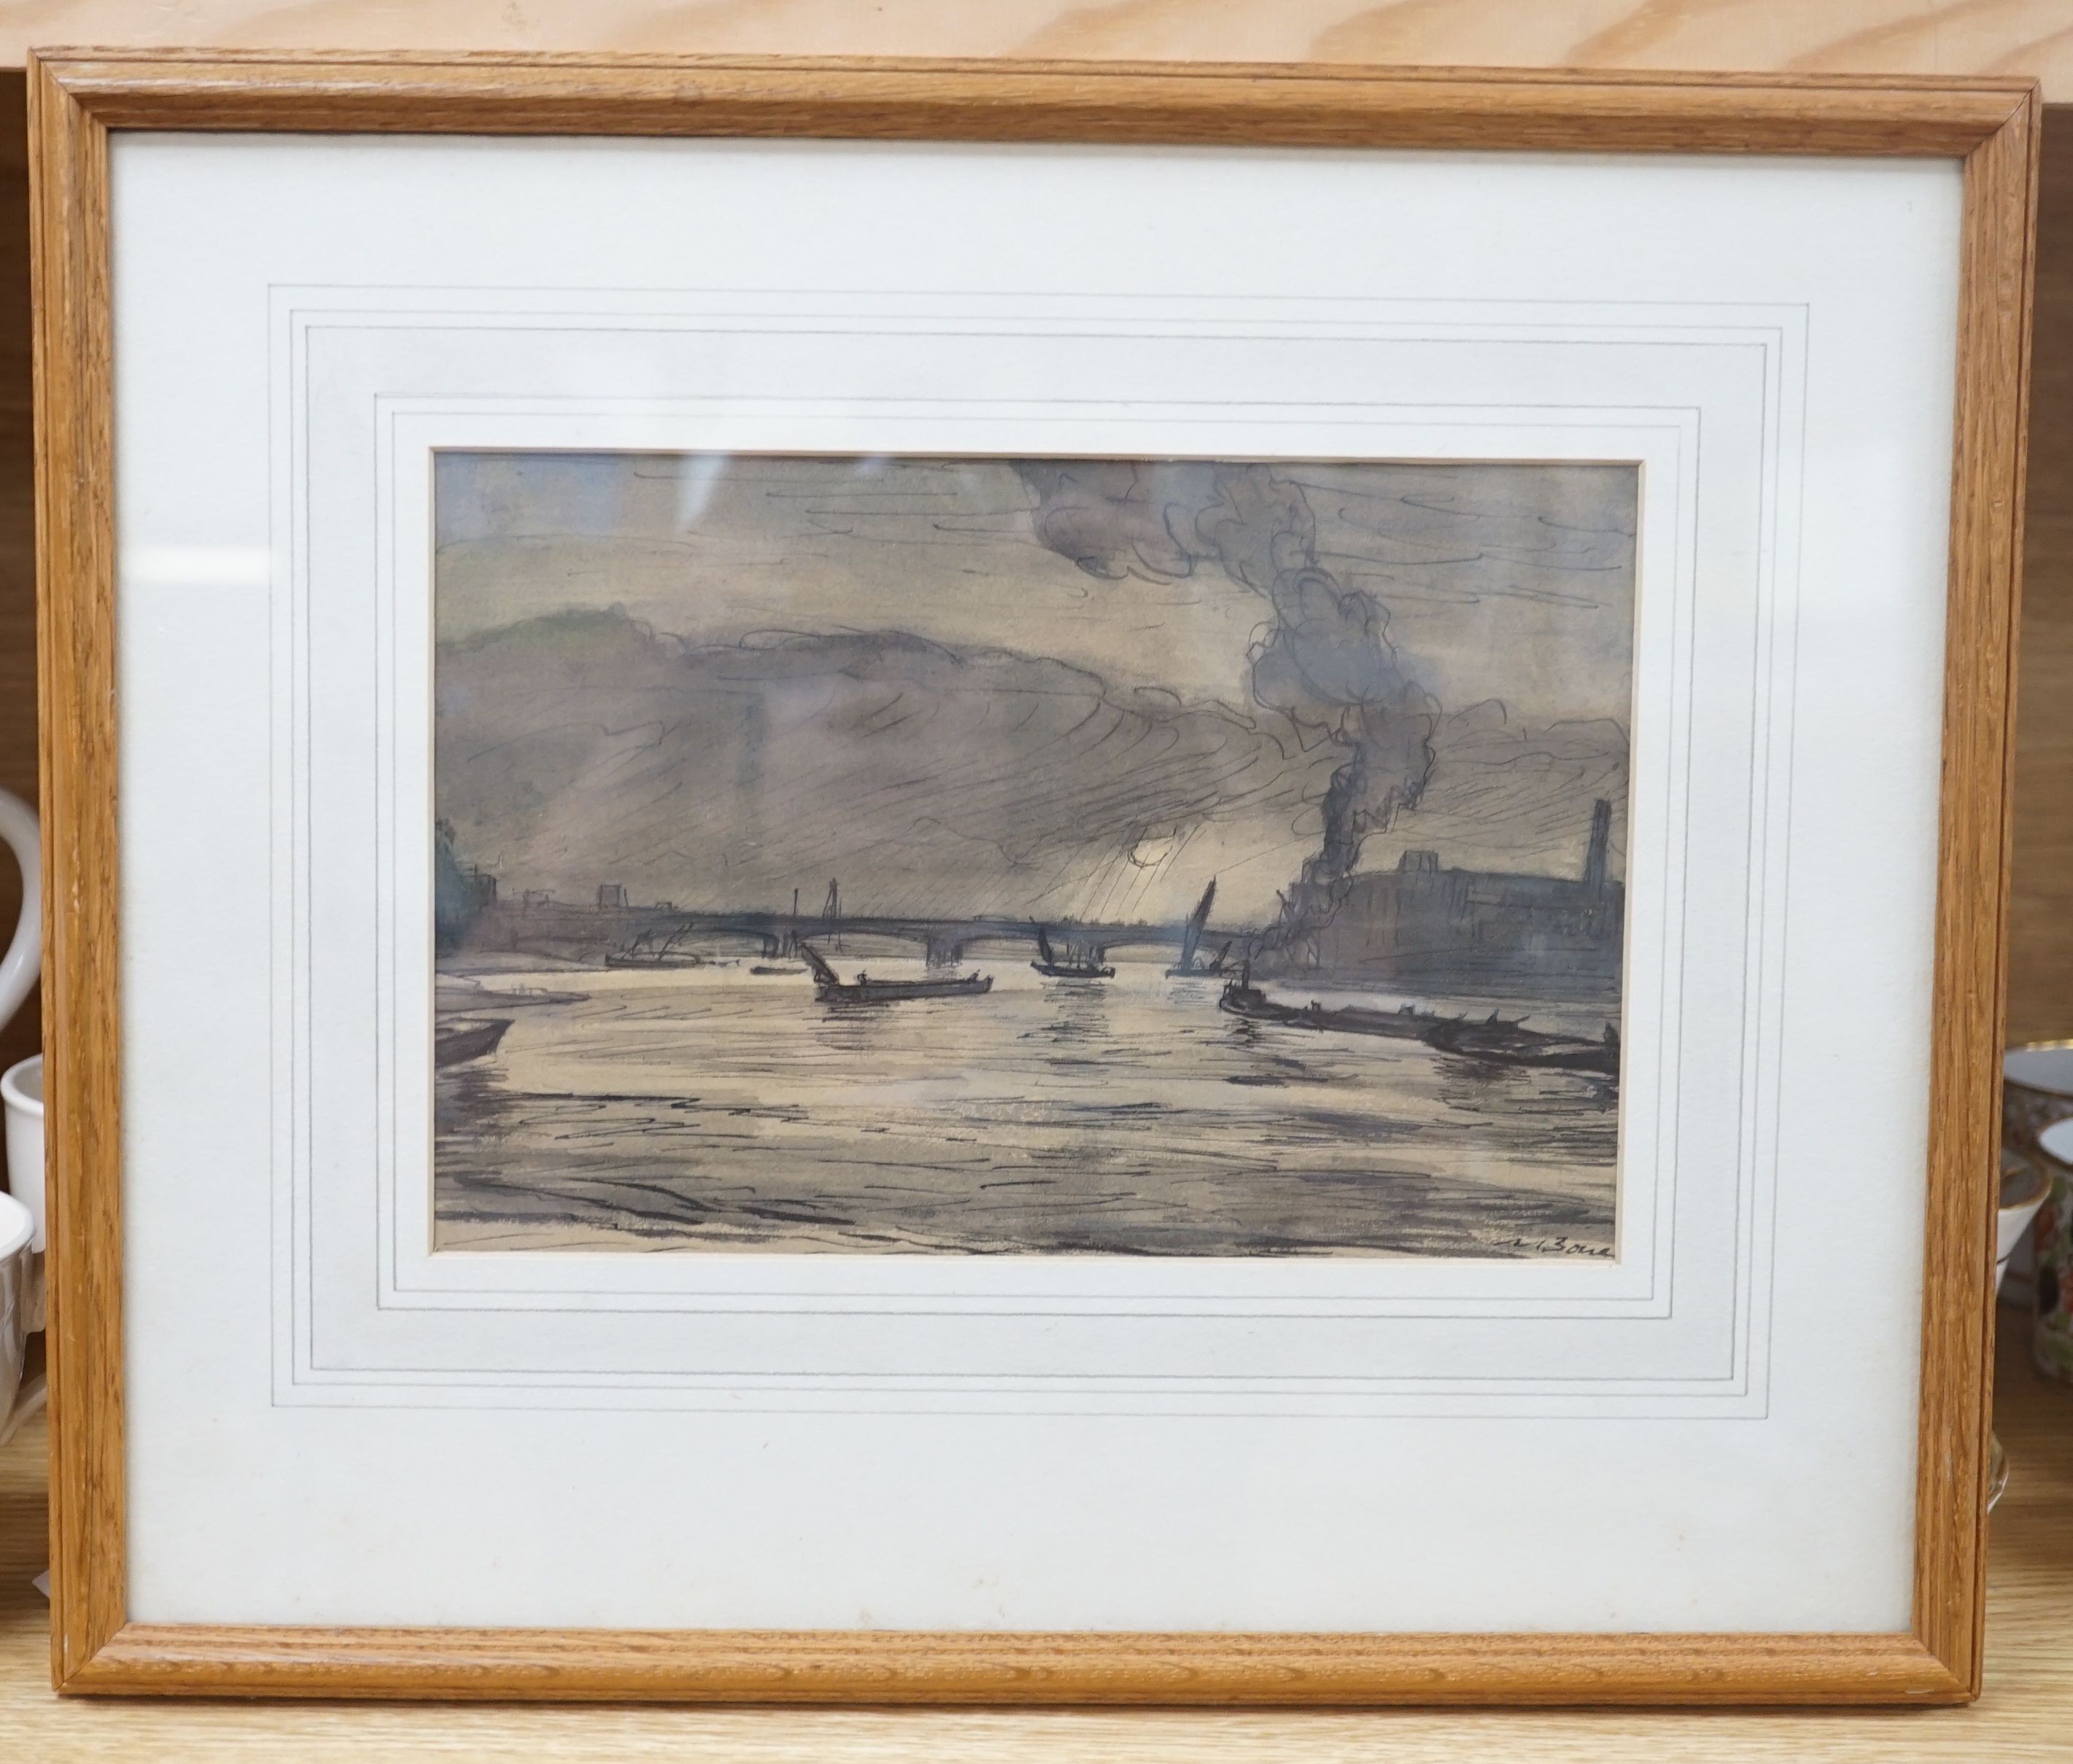 Sir Muirhead Bone (1876-1953), The Thames at Vauxhall, ink and wash, signed, 15.5 x 25cm